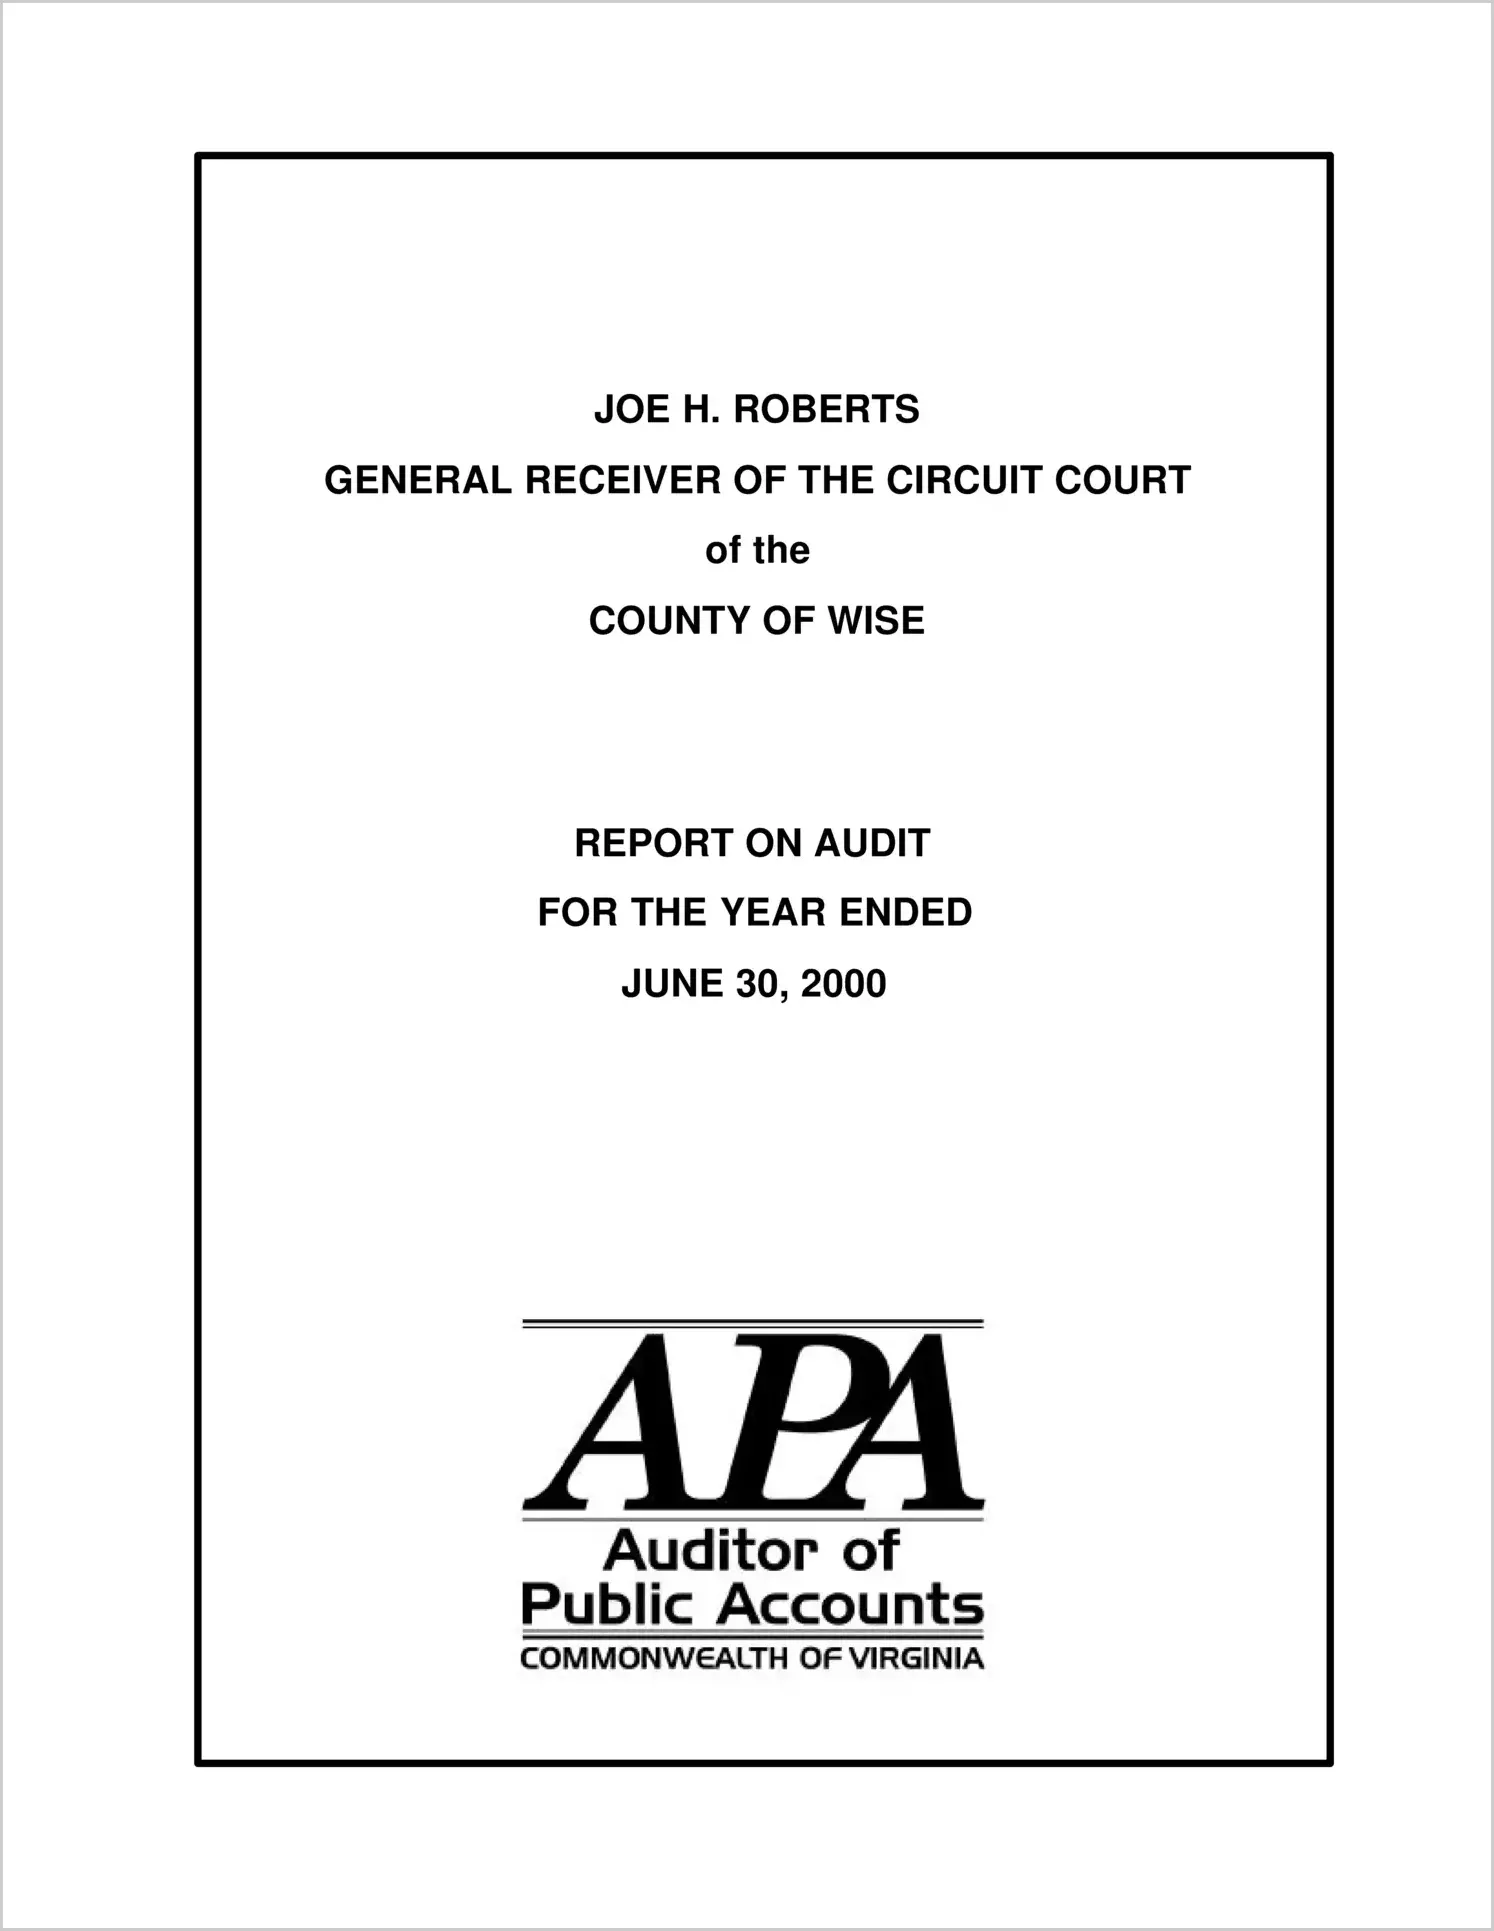 General Receiver of the Circuit Court of the County of Wise for the year ended June 30, 2000